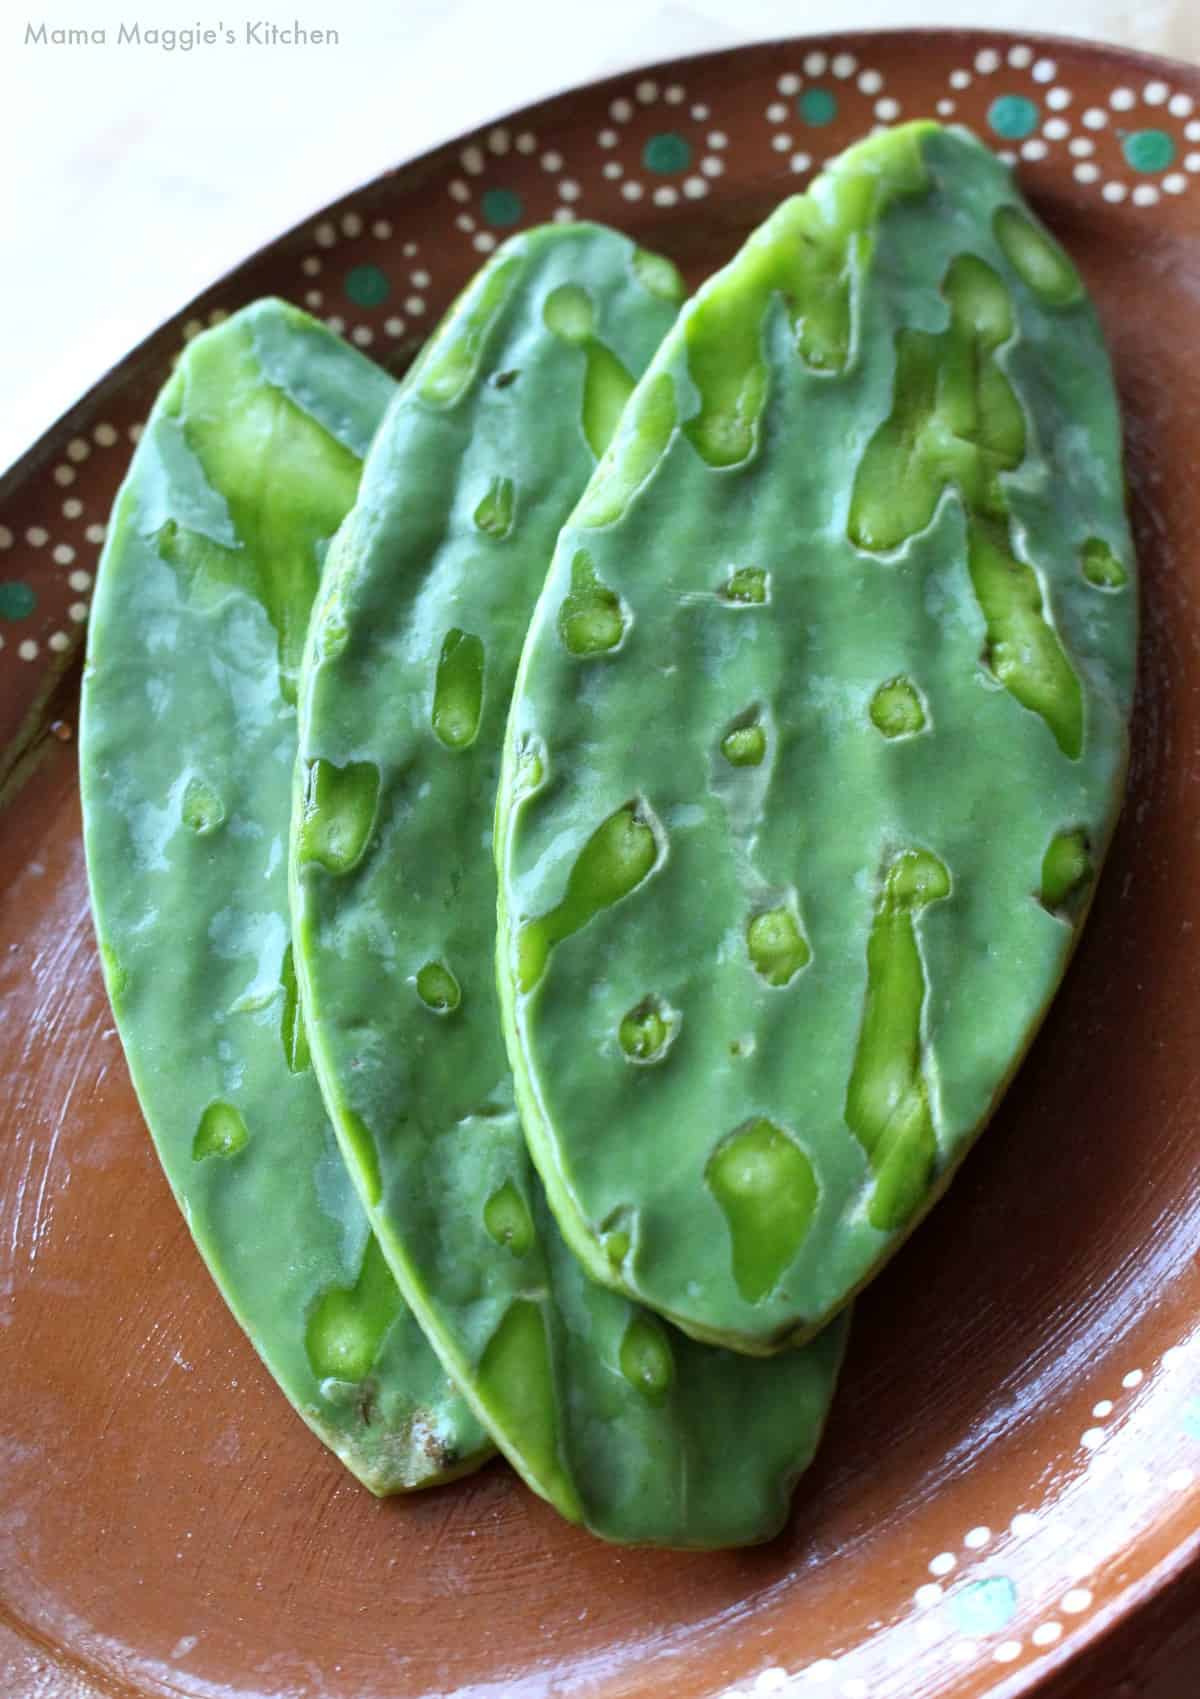 Raw cactus on a decorative clay plate.